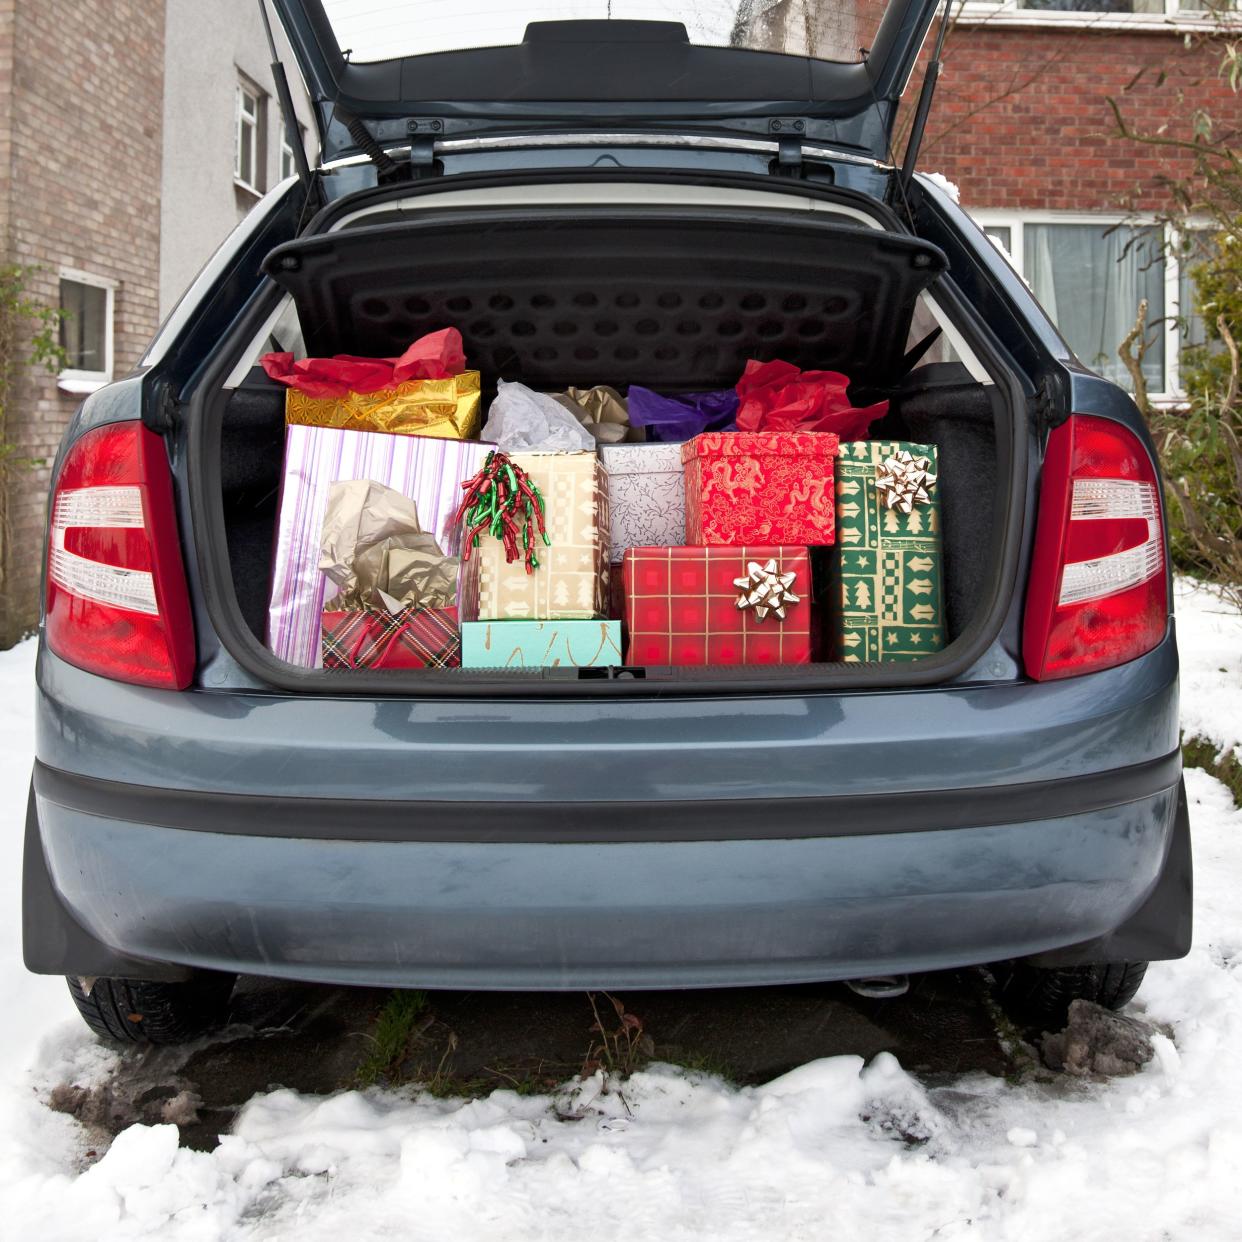 car trunk filled with Christmas presents